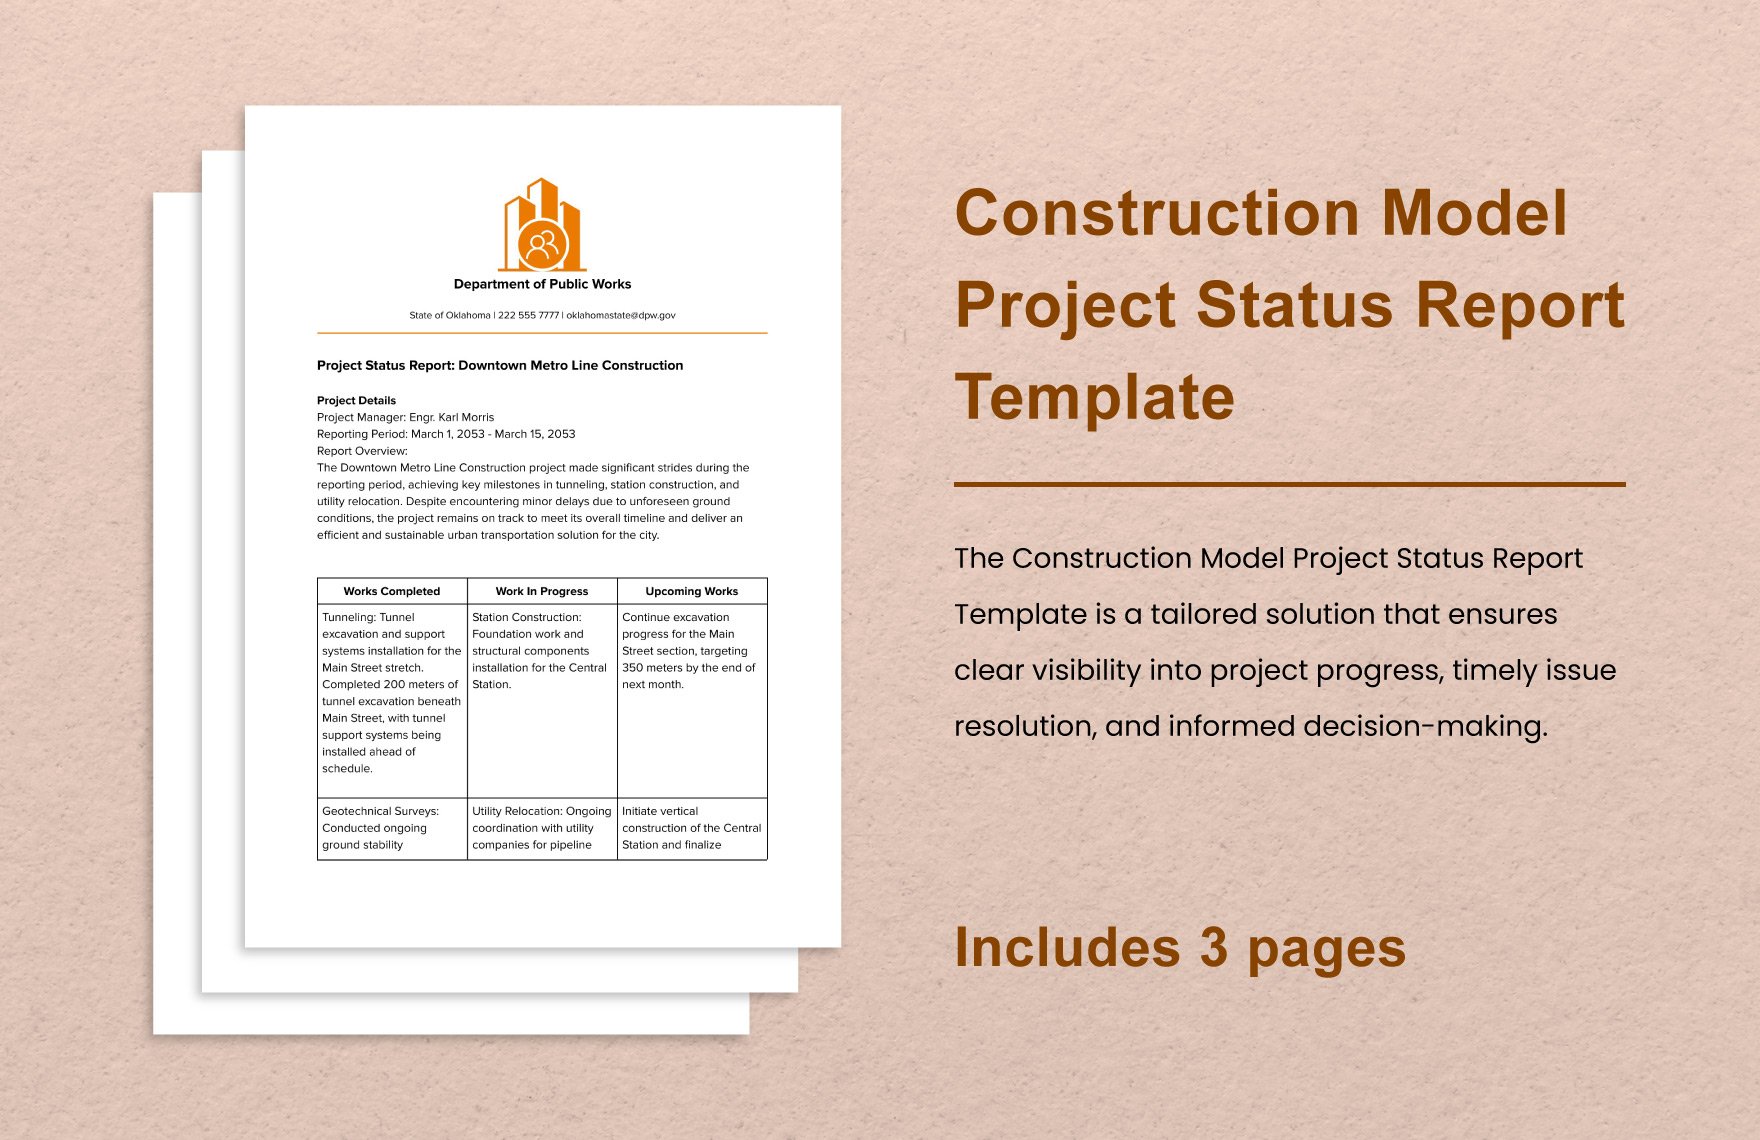 Construction Model Project Status Report Template